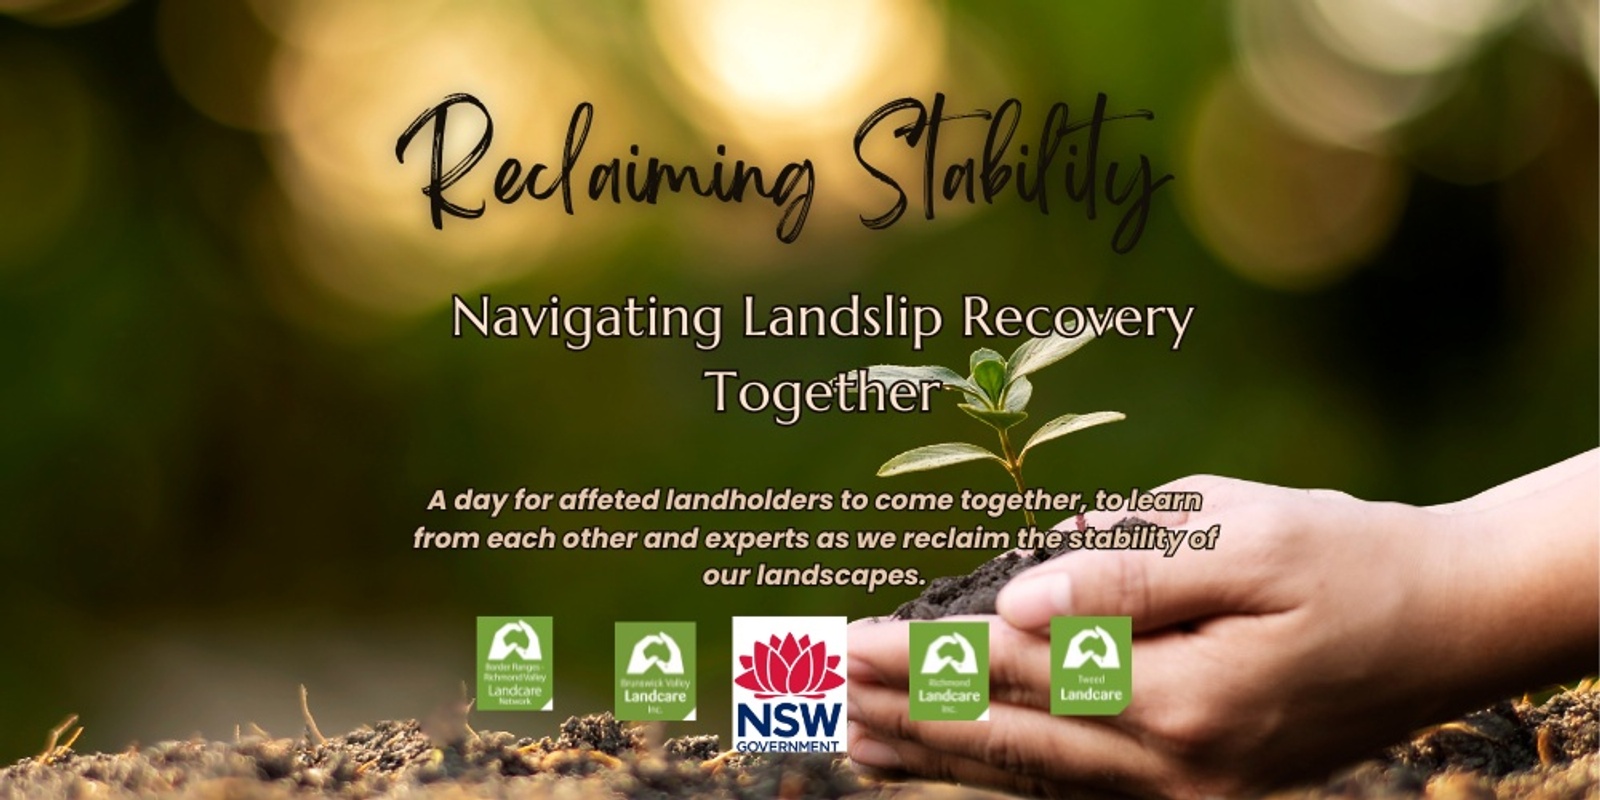 Banner image for Reclaiming Stabliity: Navigating Landslip Recovery Together